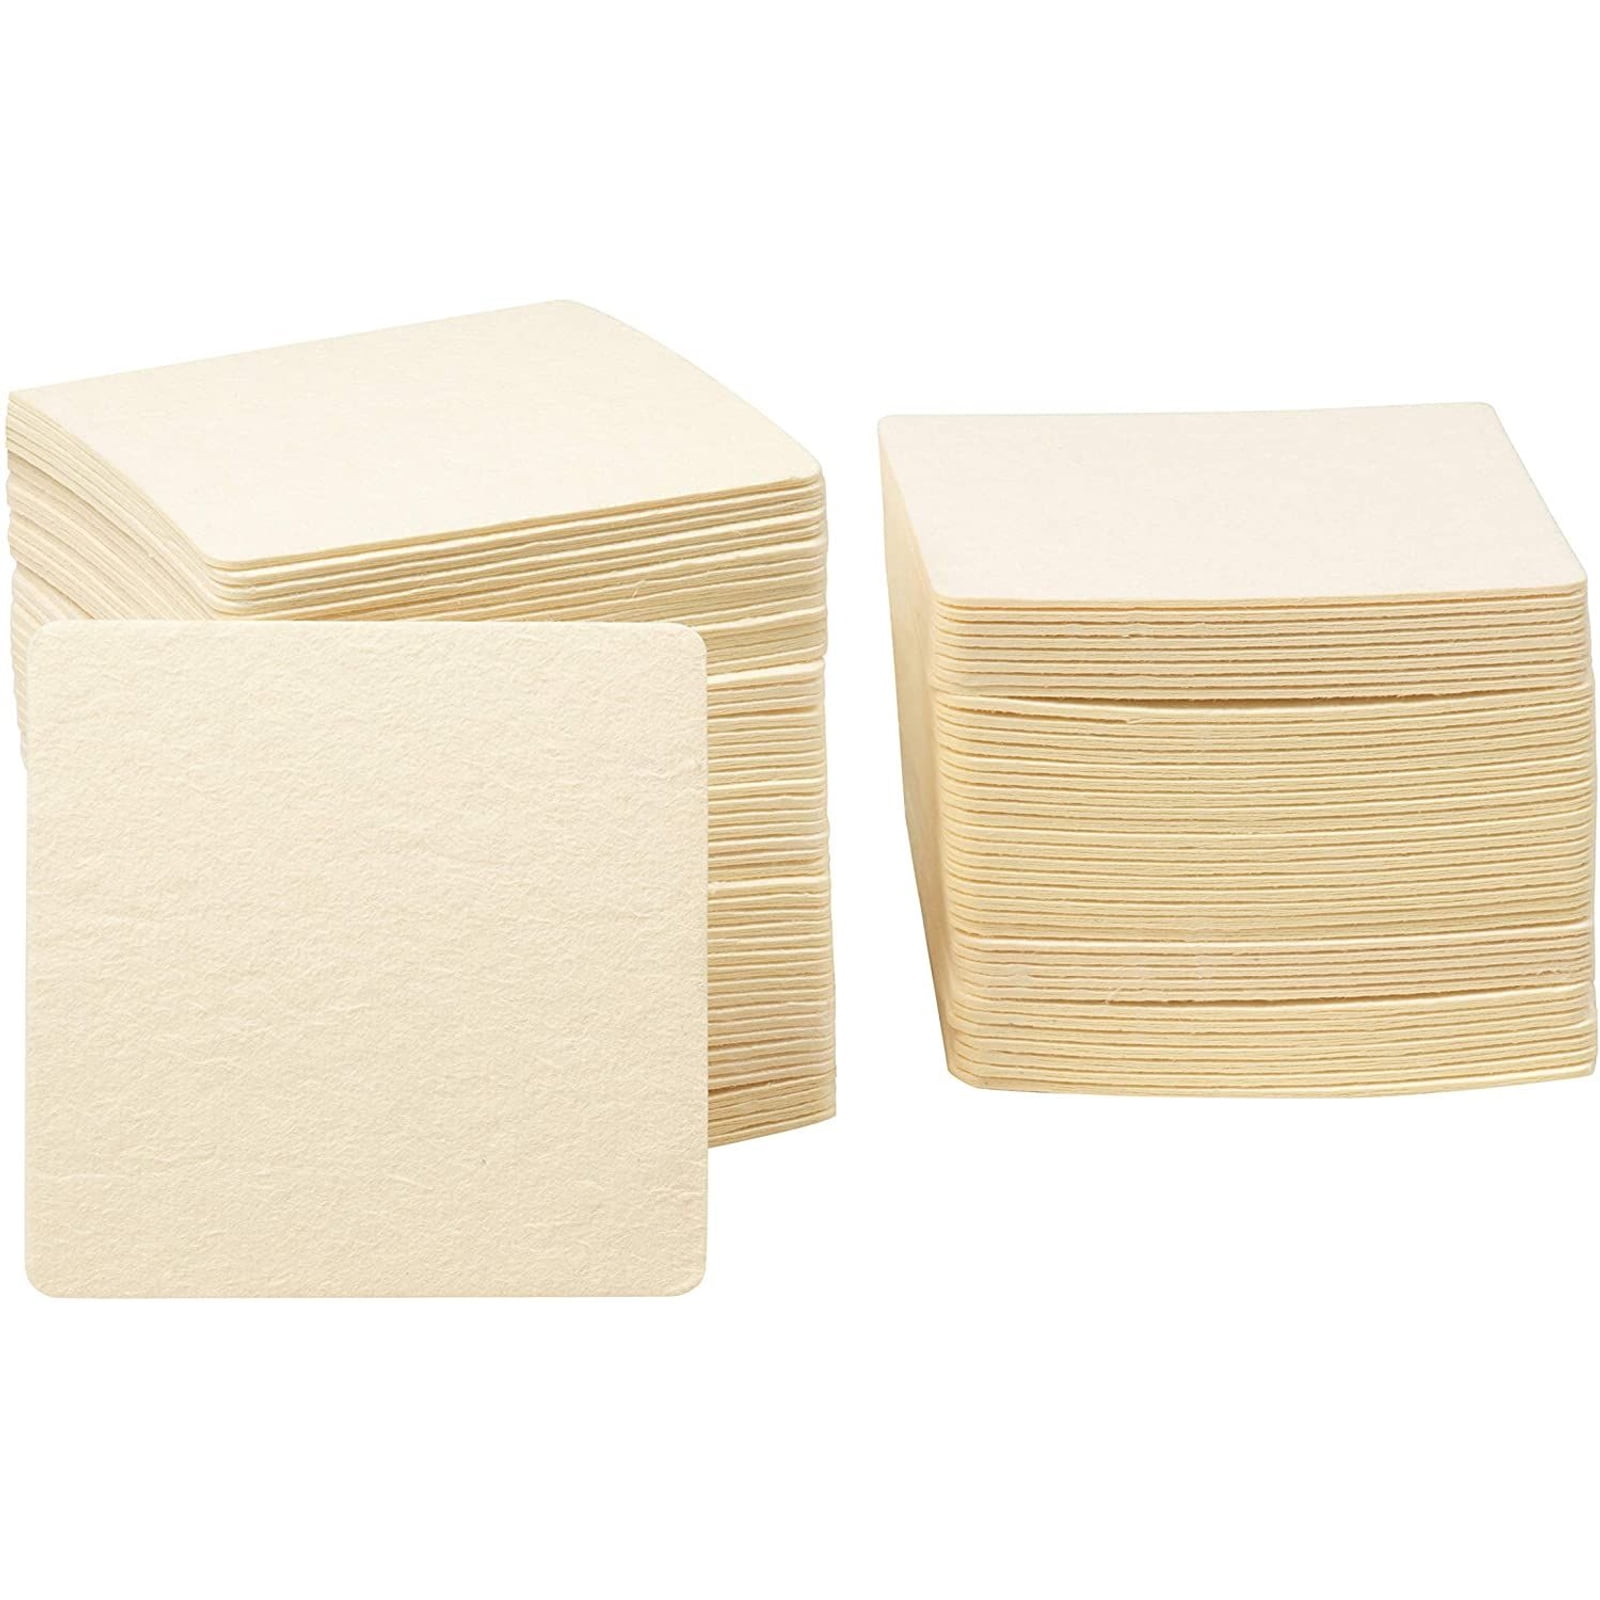 4,6,12 MDF Wood Square Coasters BLANK laser cut 9mm thick drink mats 